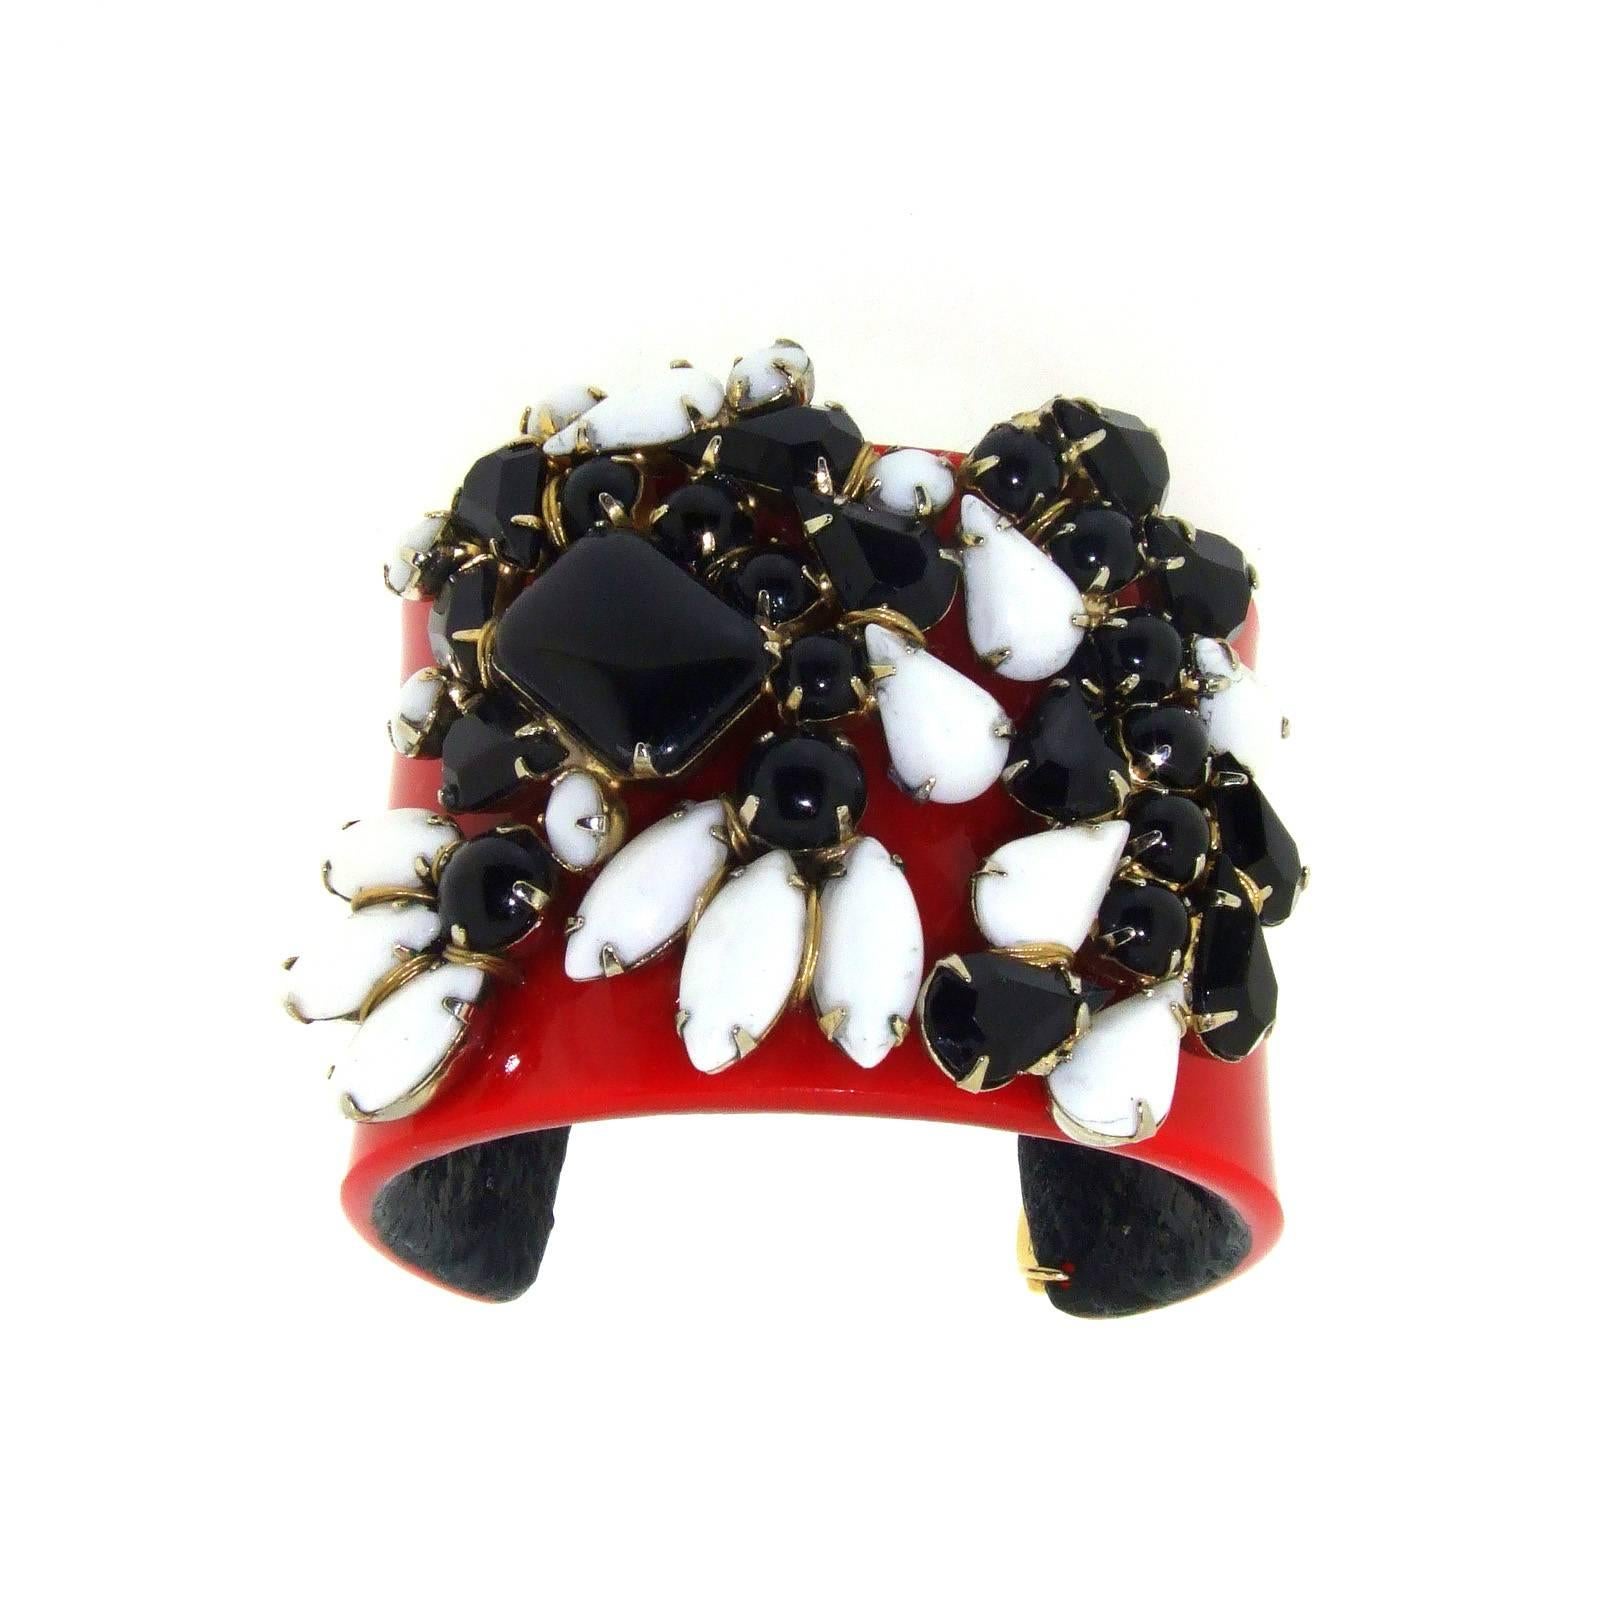 Ace Of Clubs: Black and white milk glass, matching swirl effect trio splashed upon blood red cuff with black leather lining. A unique cuff bracelet by Katherine Alexander London hand lined with leather.